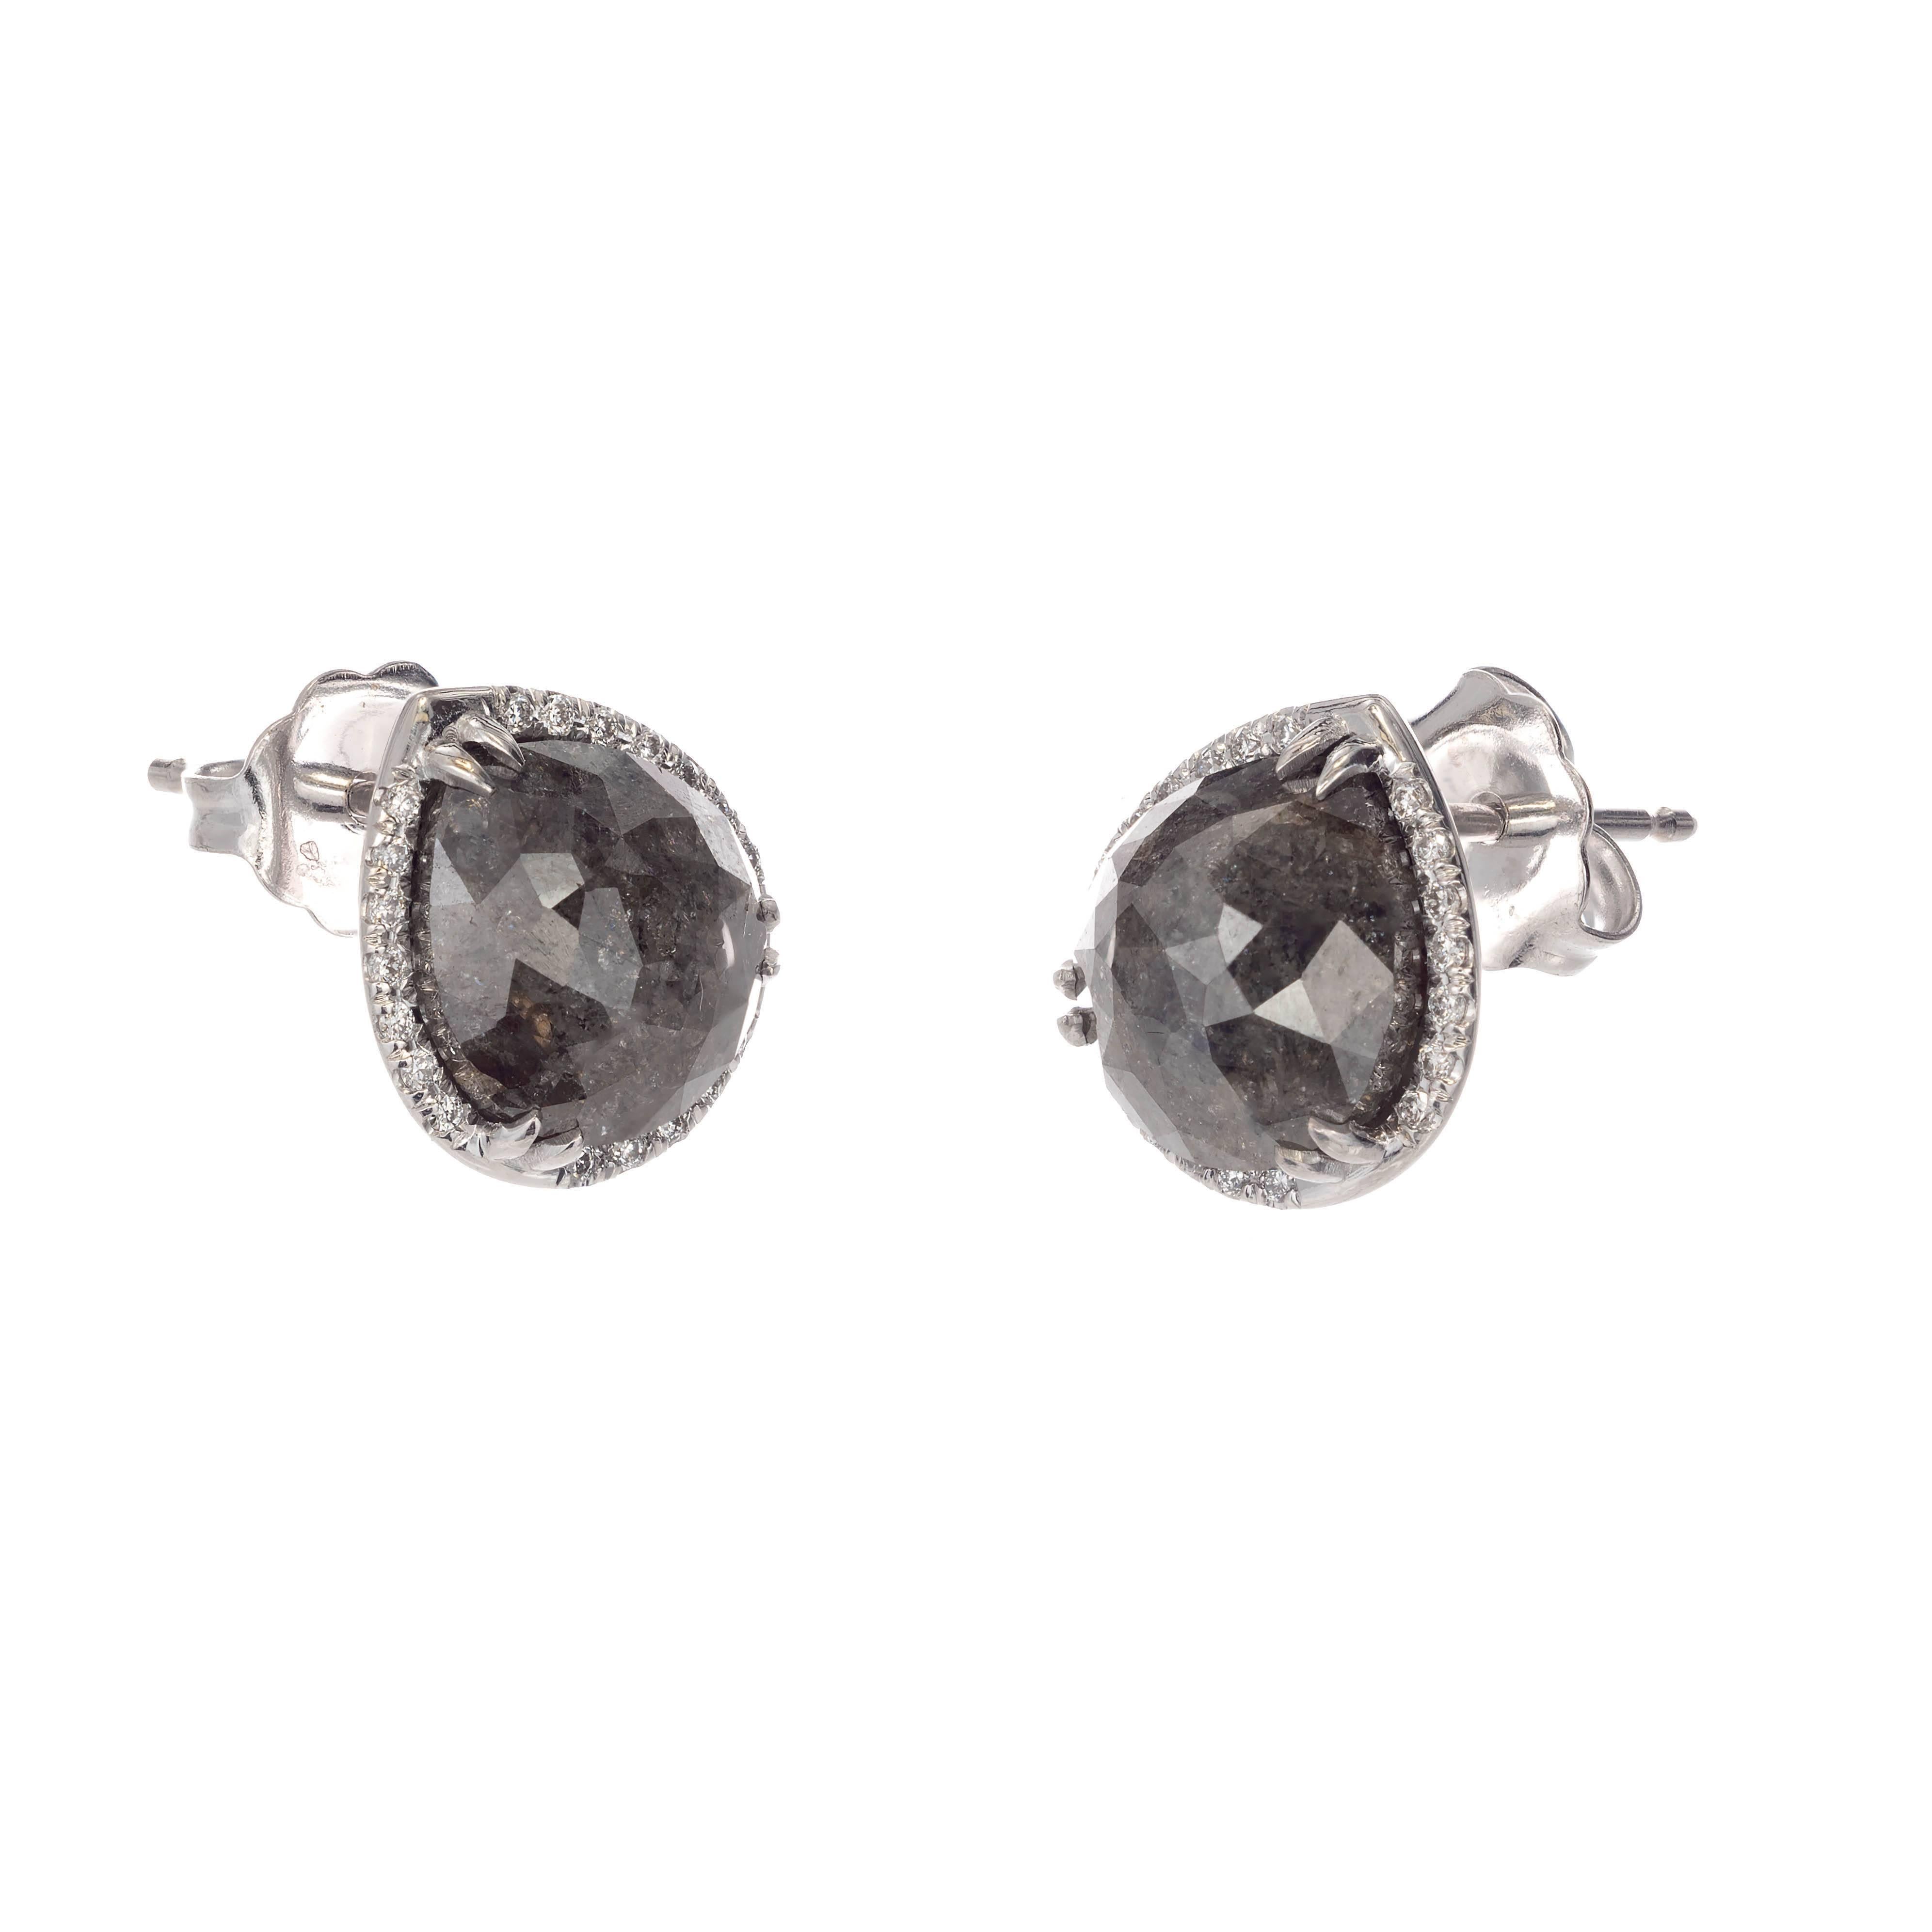 18k white gold dark gray diamond stud earrings. A pair of natural, fancy dark gray pear shape, rose cut diamonds are set in a halo of white round brilliant cut diamonds.

1 pear rose cut fancy dark gray diamond 8.52 x 7.31 x 3.48 Approximate 1.87